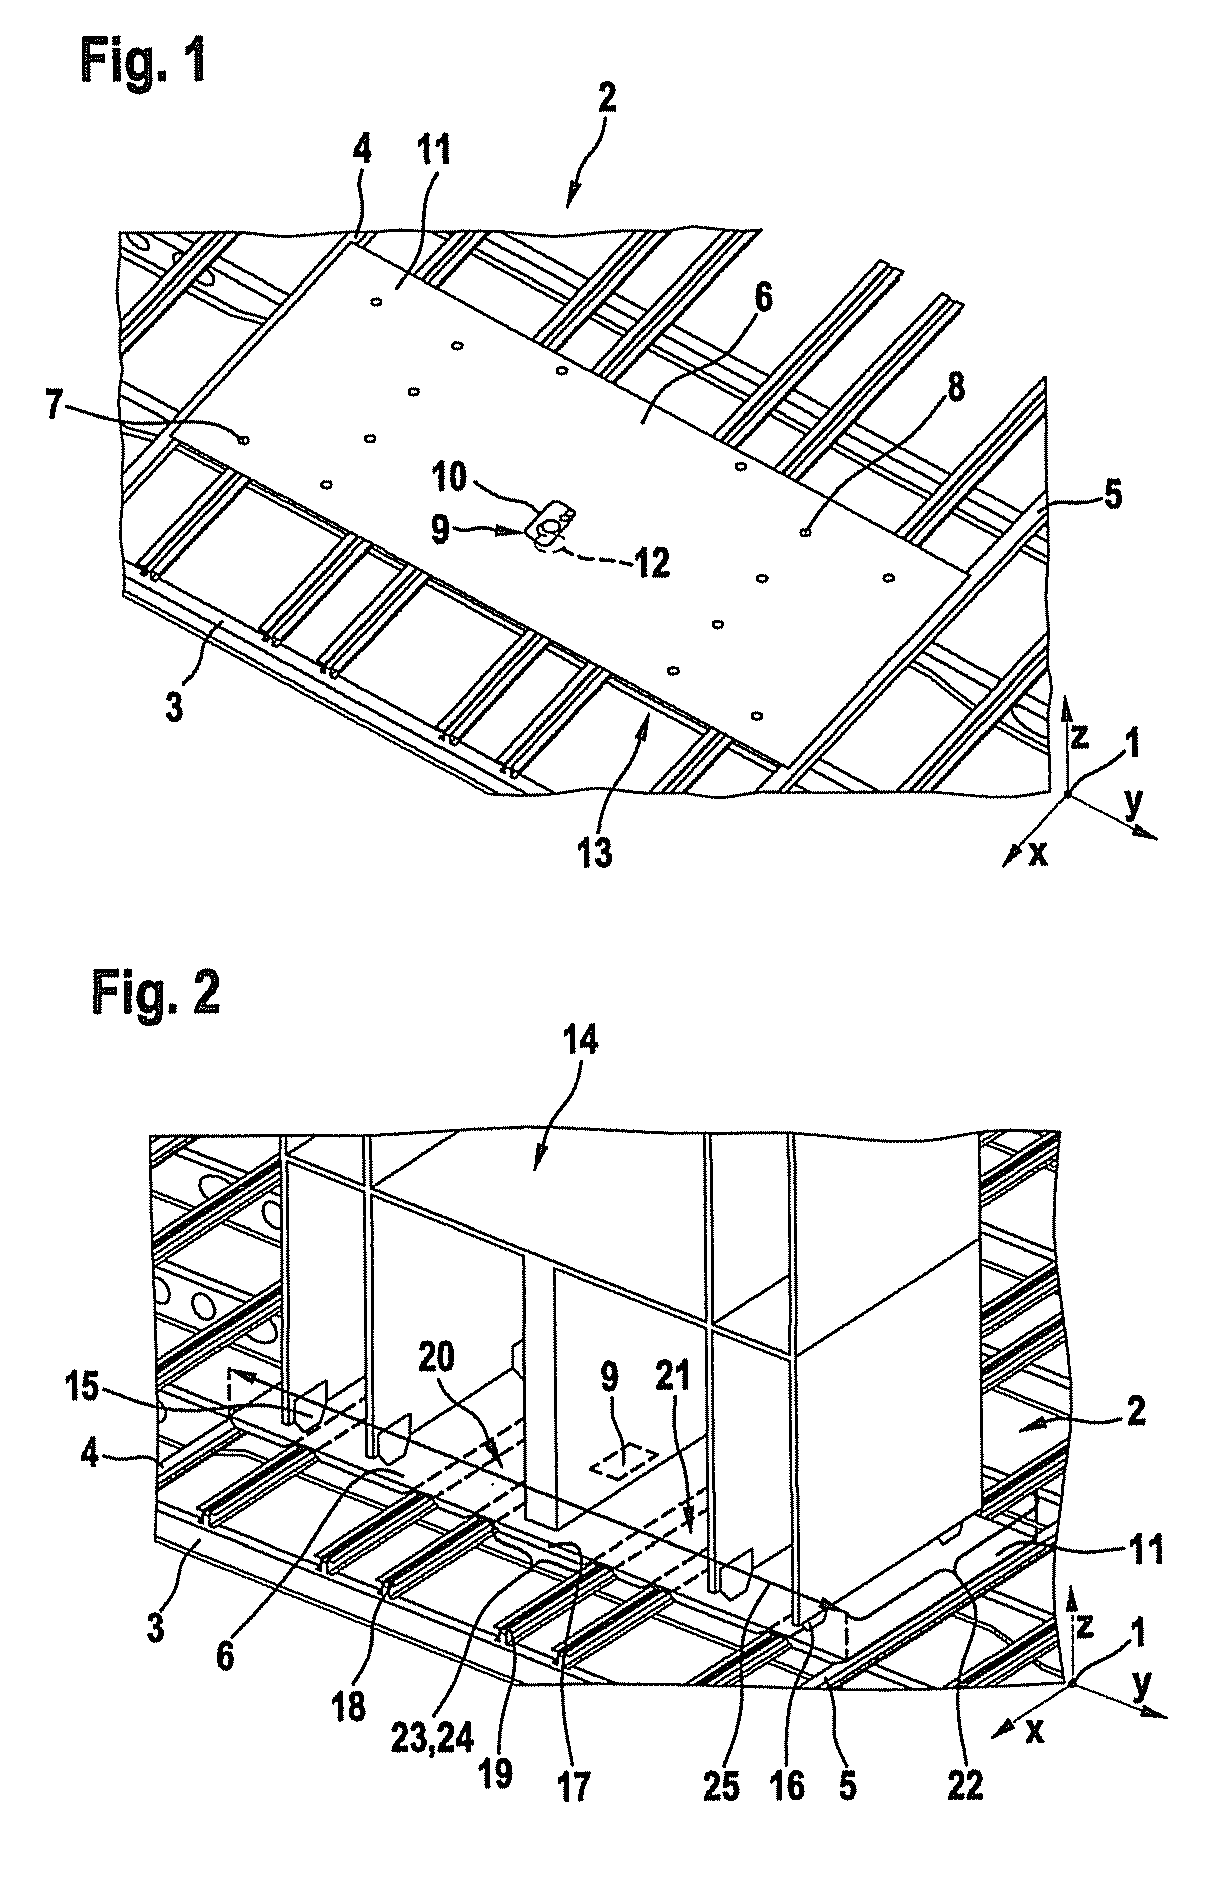 Floor plate for covering a floor framework in an aircraft